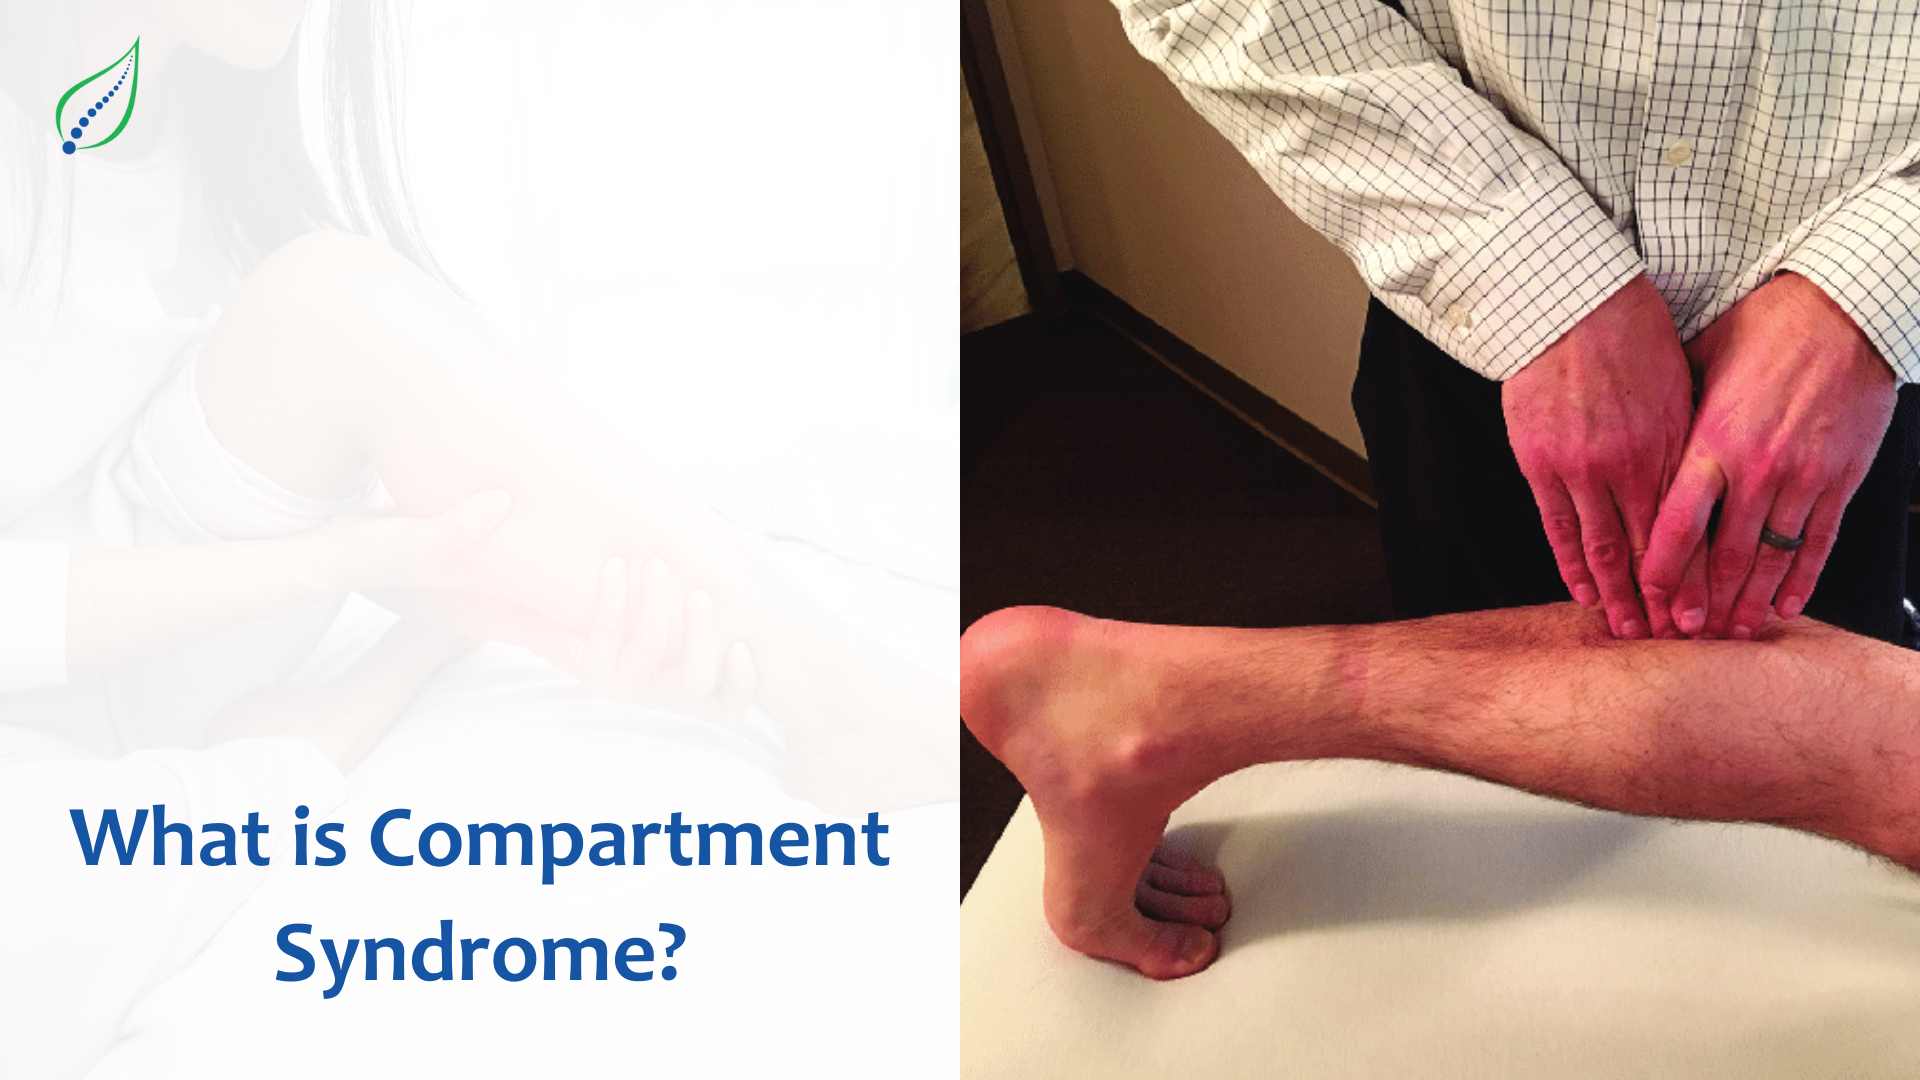 What is Compartment Syndrome?